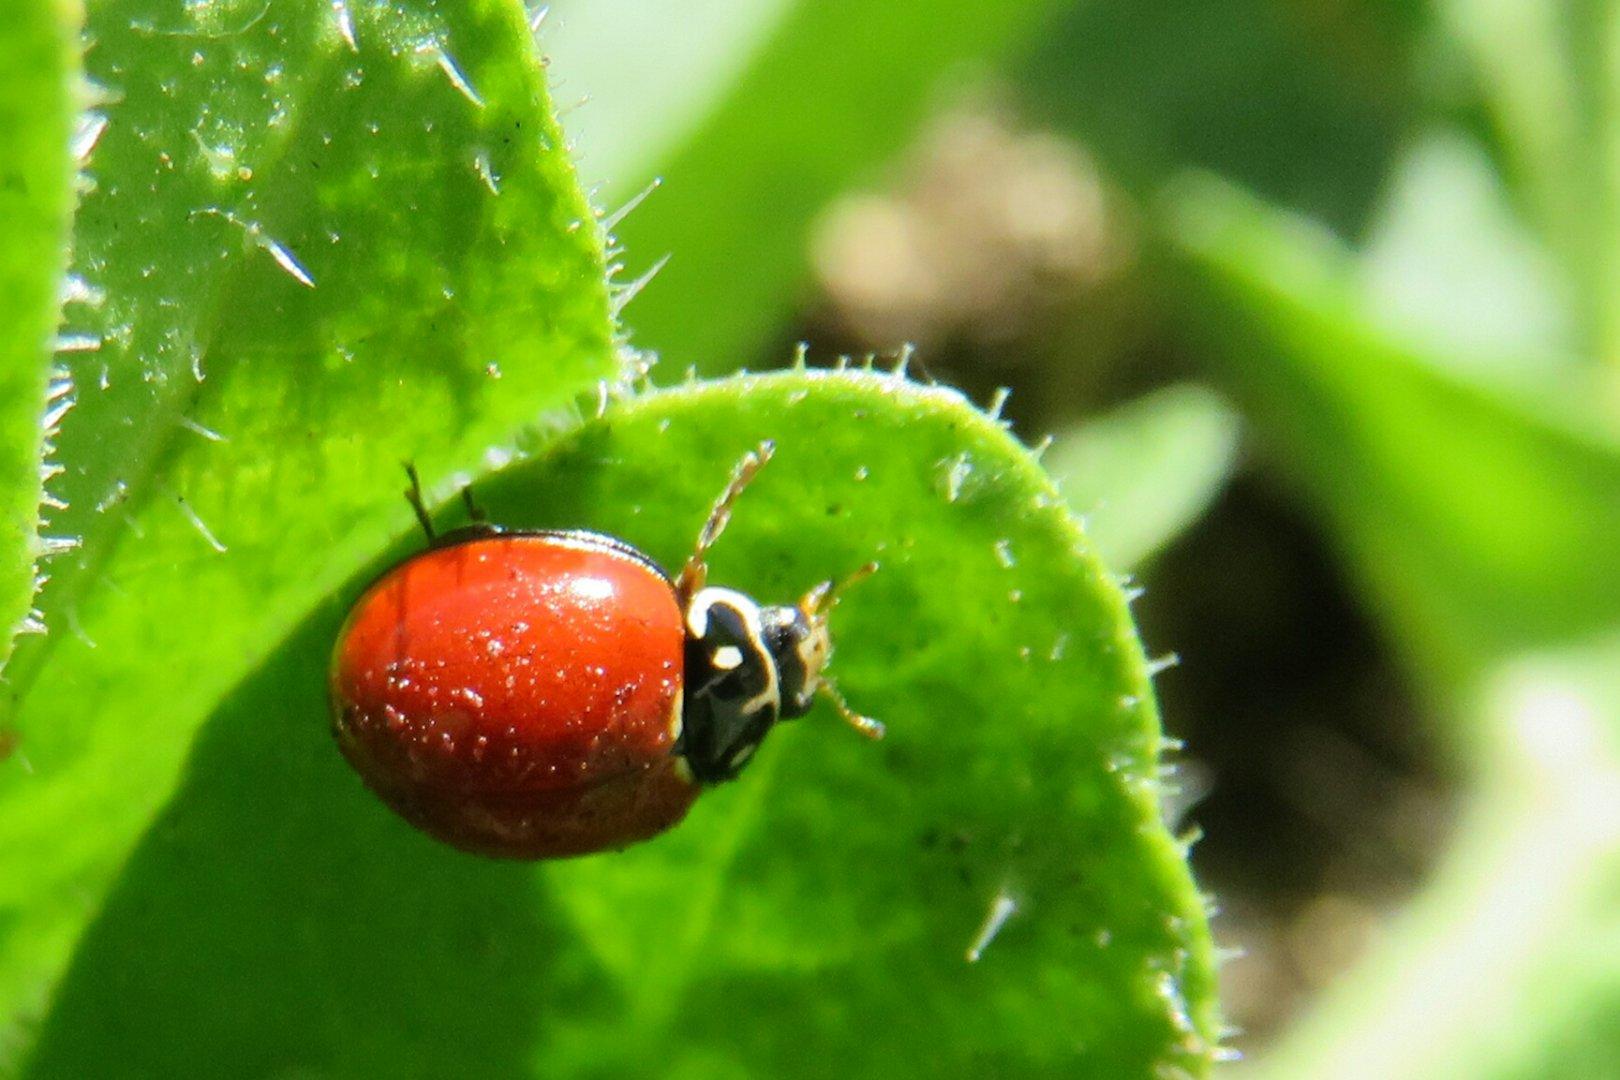 A spotless lady #beetle, um, spotted on a weed growing by the sidewalk. https://www.inaturalist.org/observations/28094227 #nature #insects